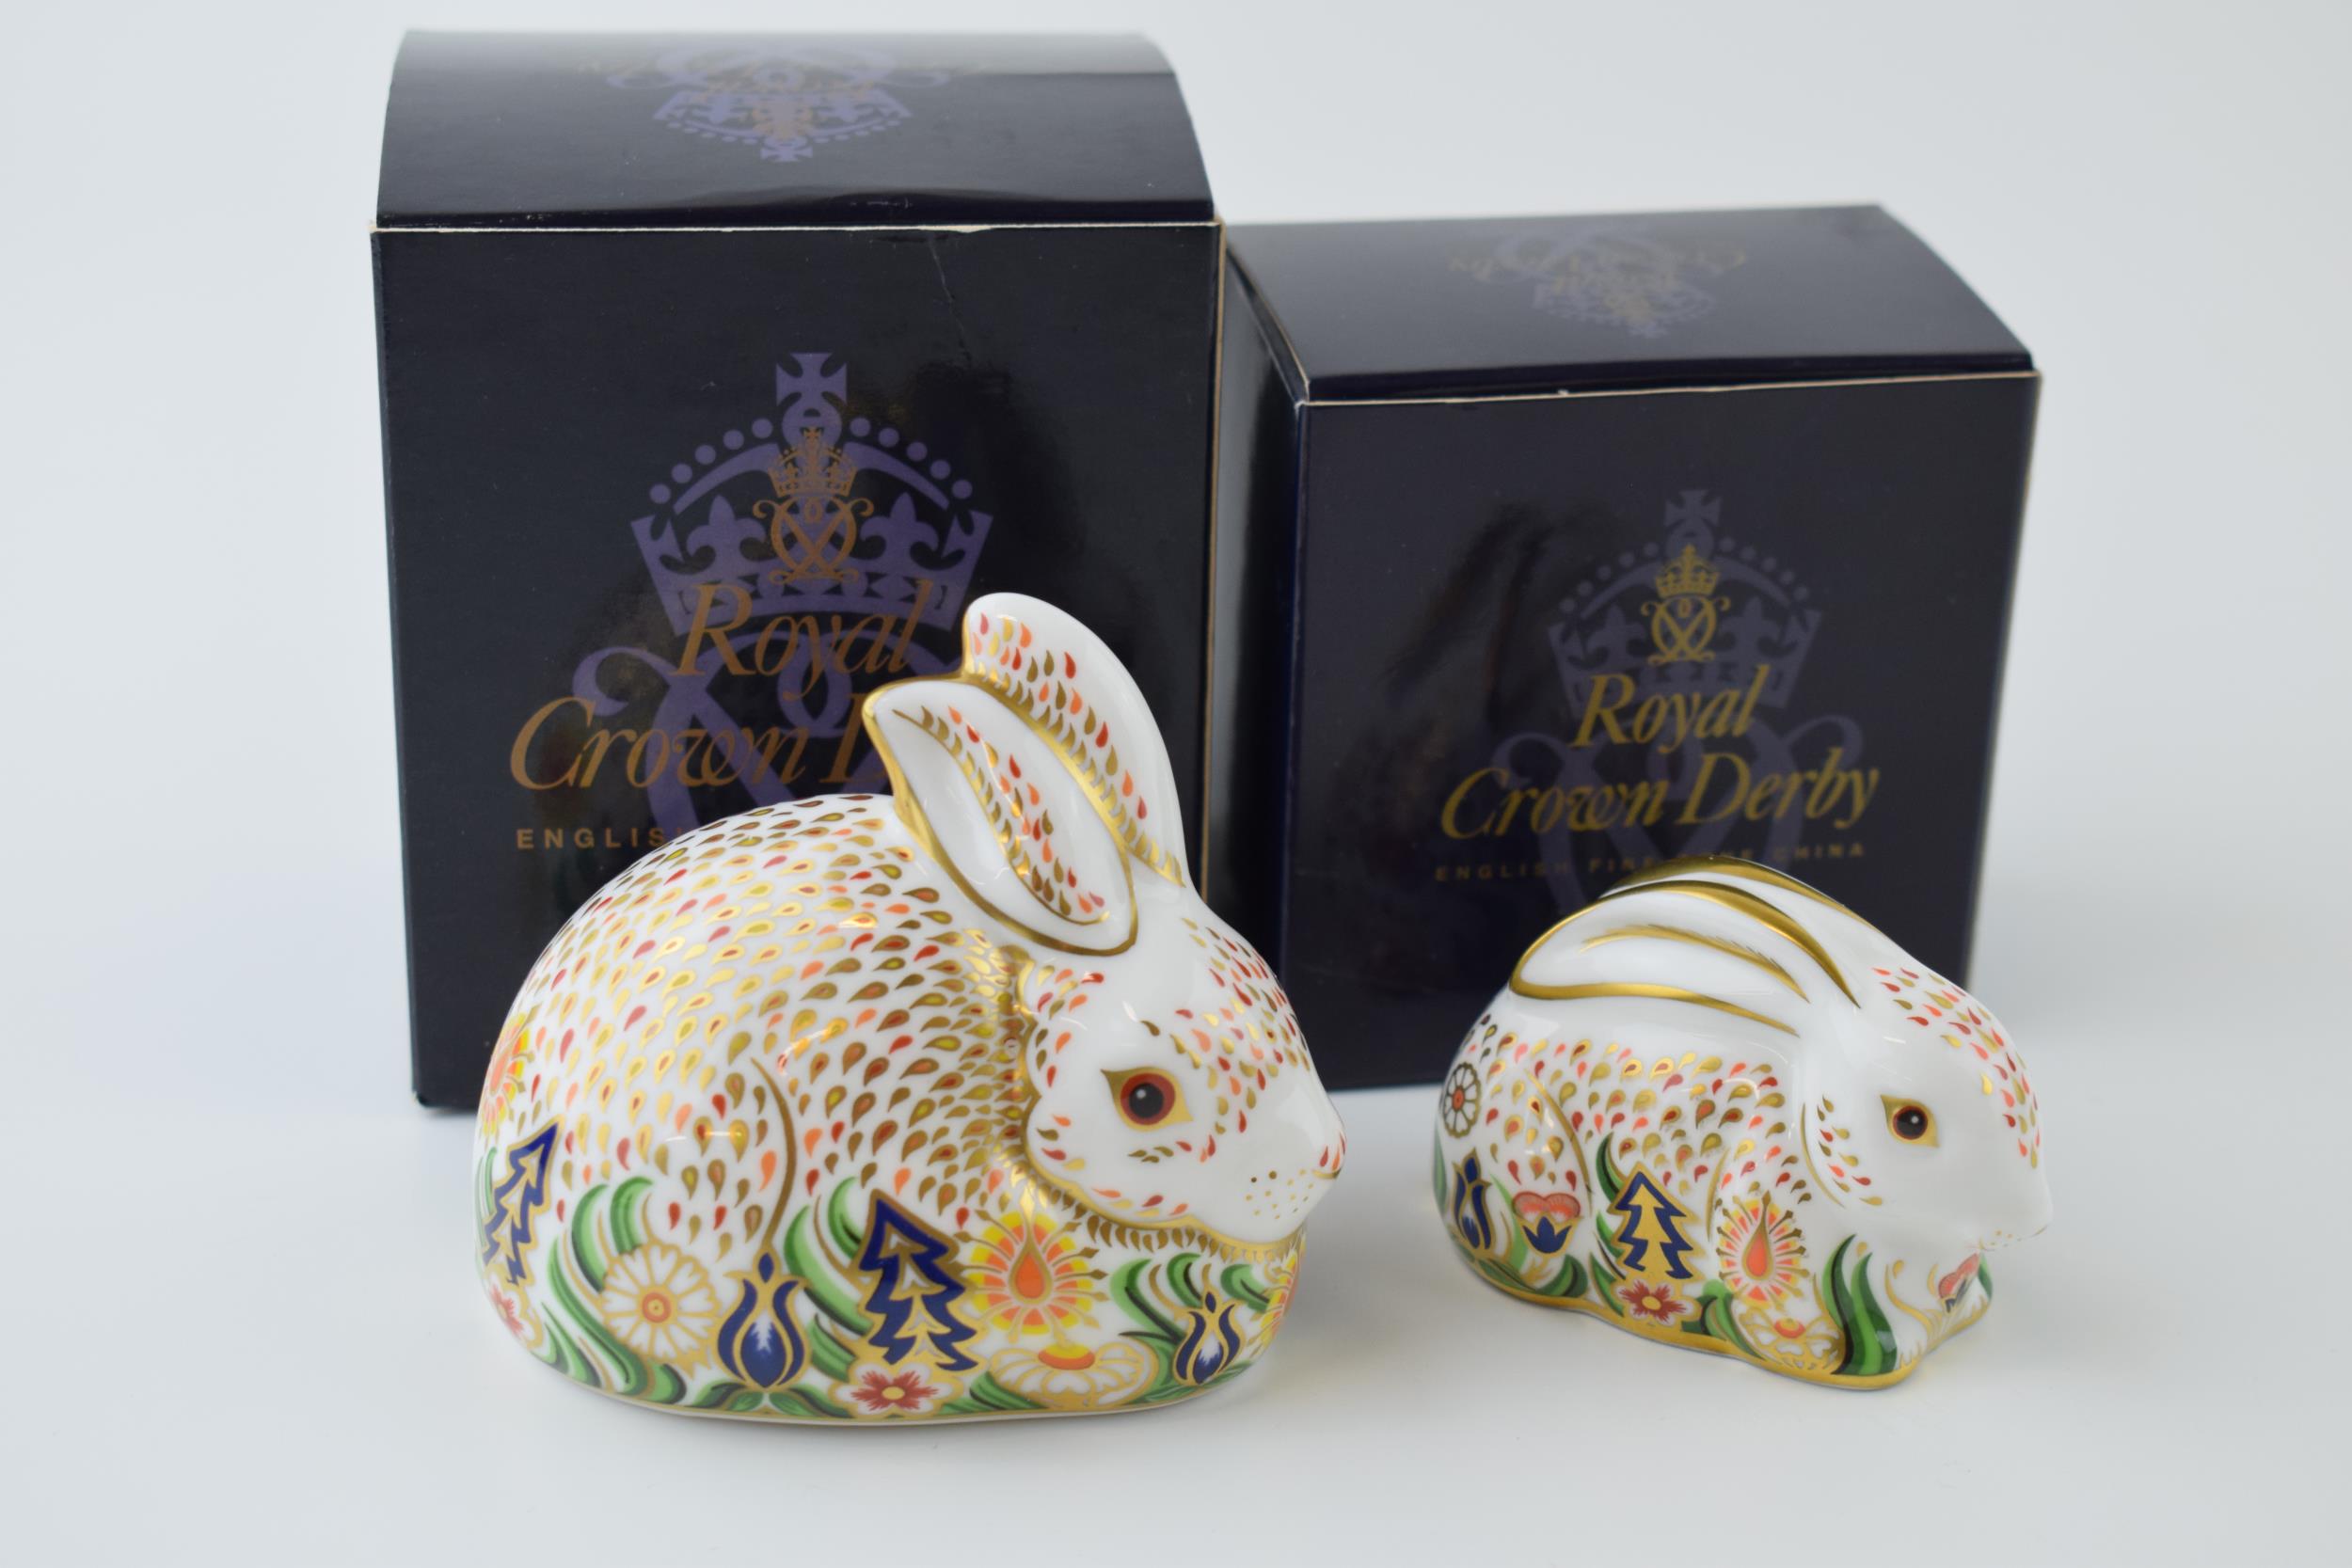 Royal Crown Derby paperweight, Rowsley Rabbit, signed in gold by Sue Rowe, boxed, and Baby Rowsley - Image 2 of 4